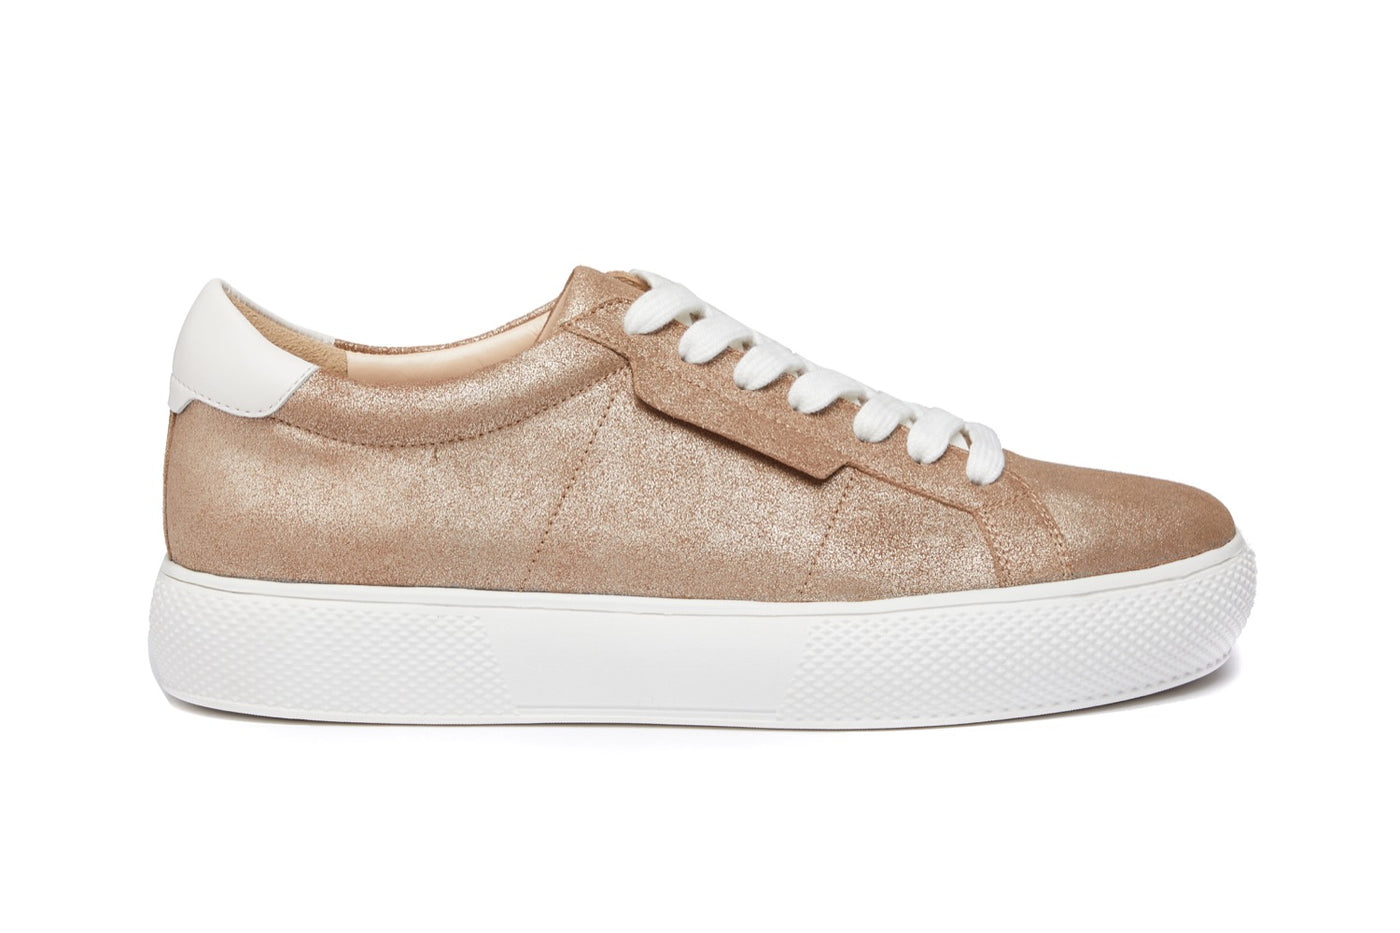 Women's low top trainer in bronze gold leather with white laces and trims